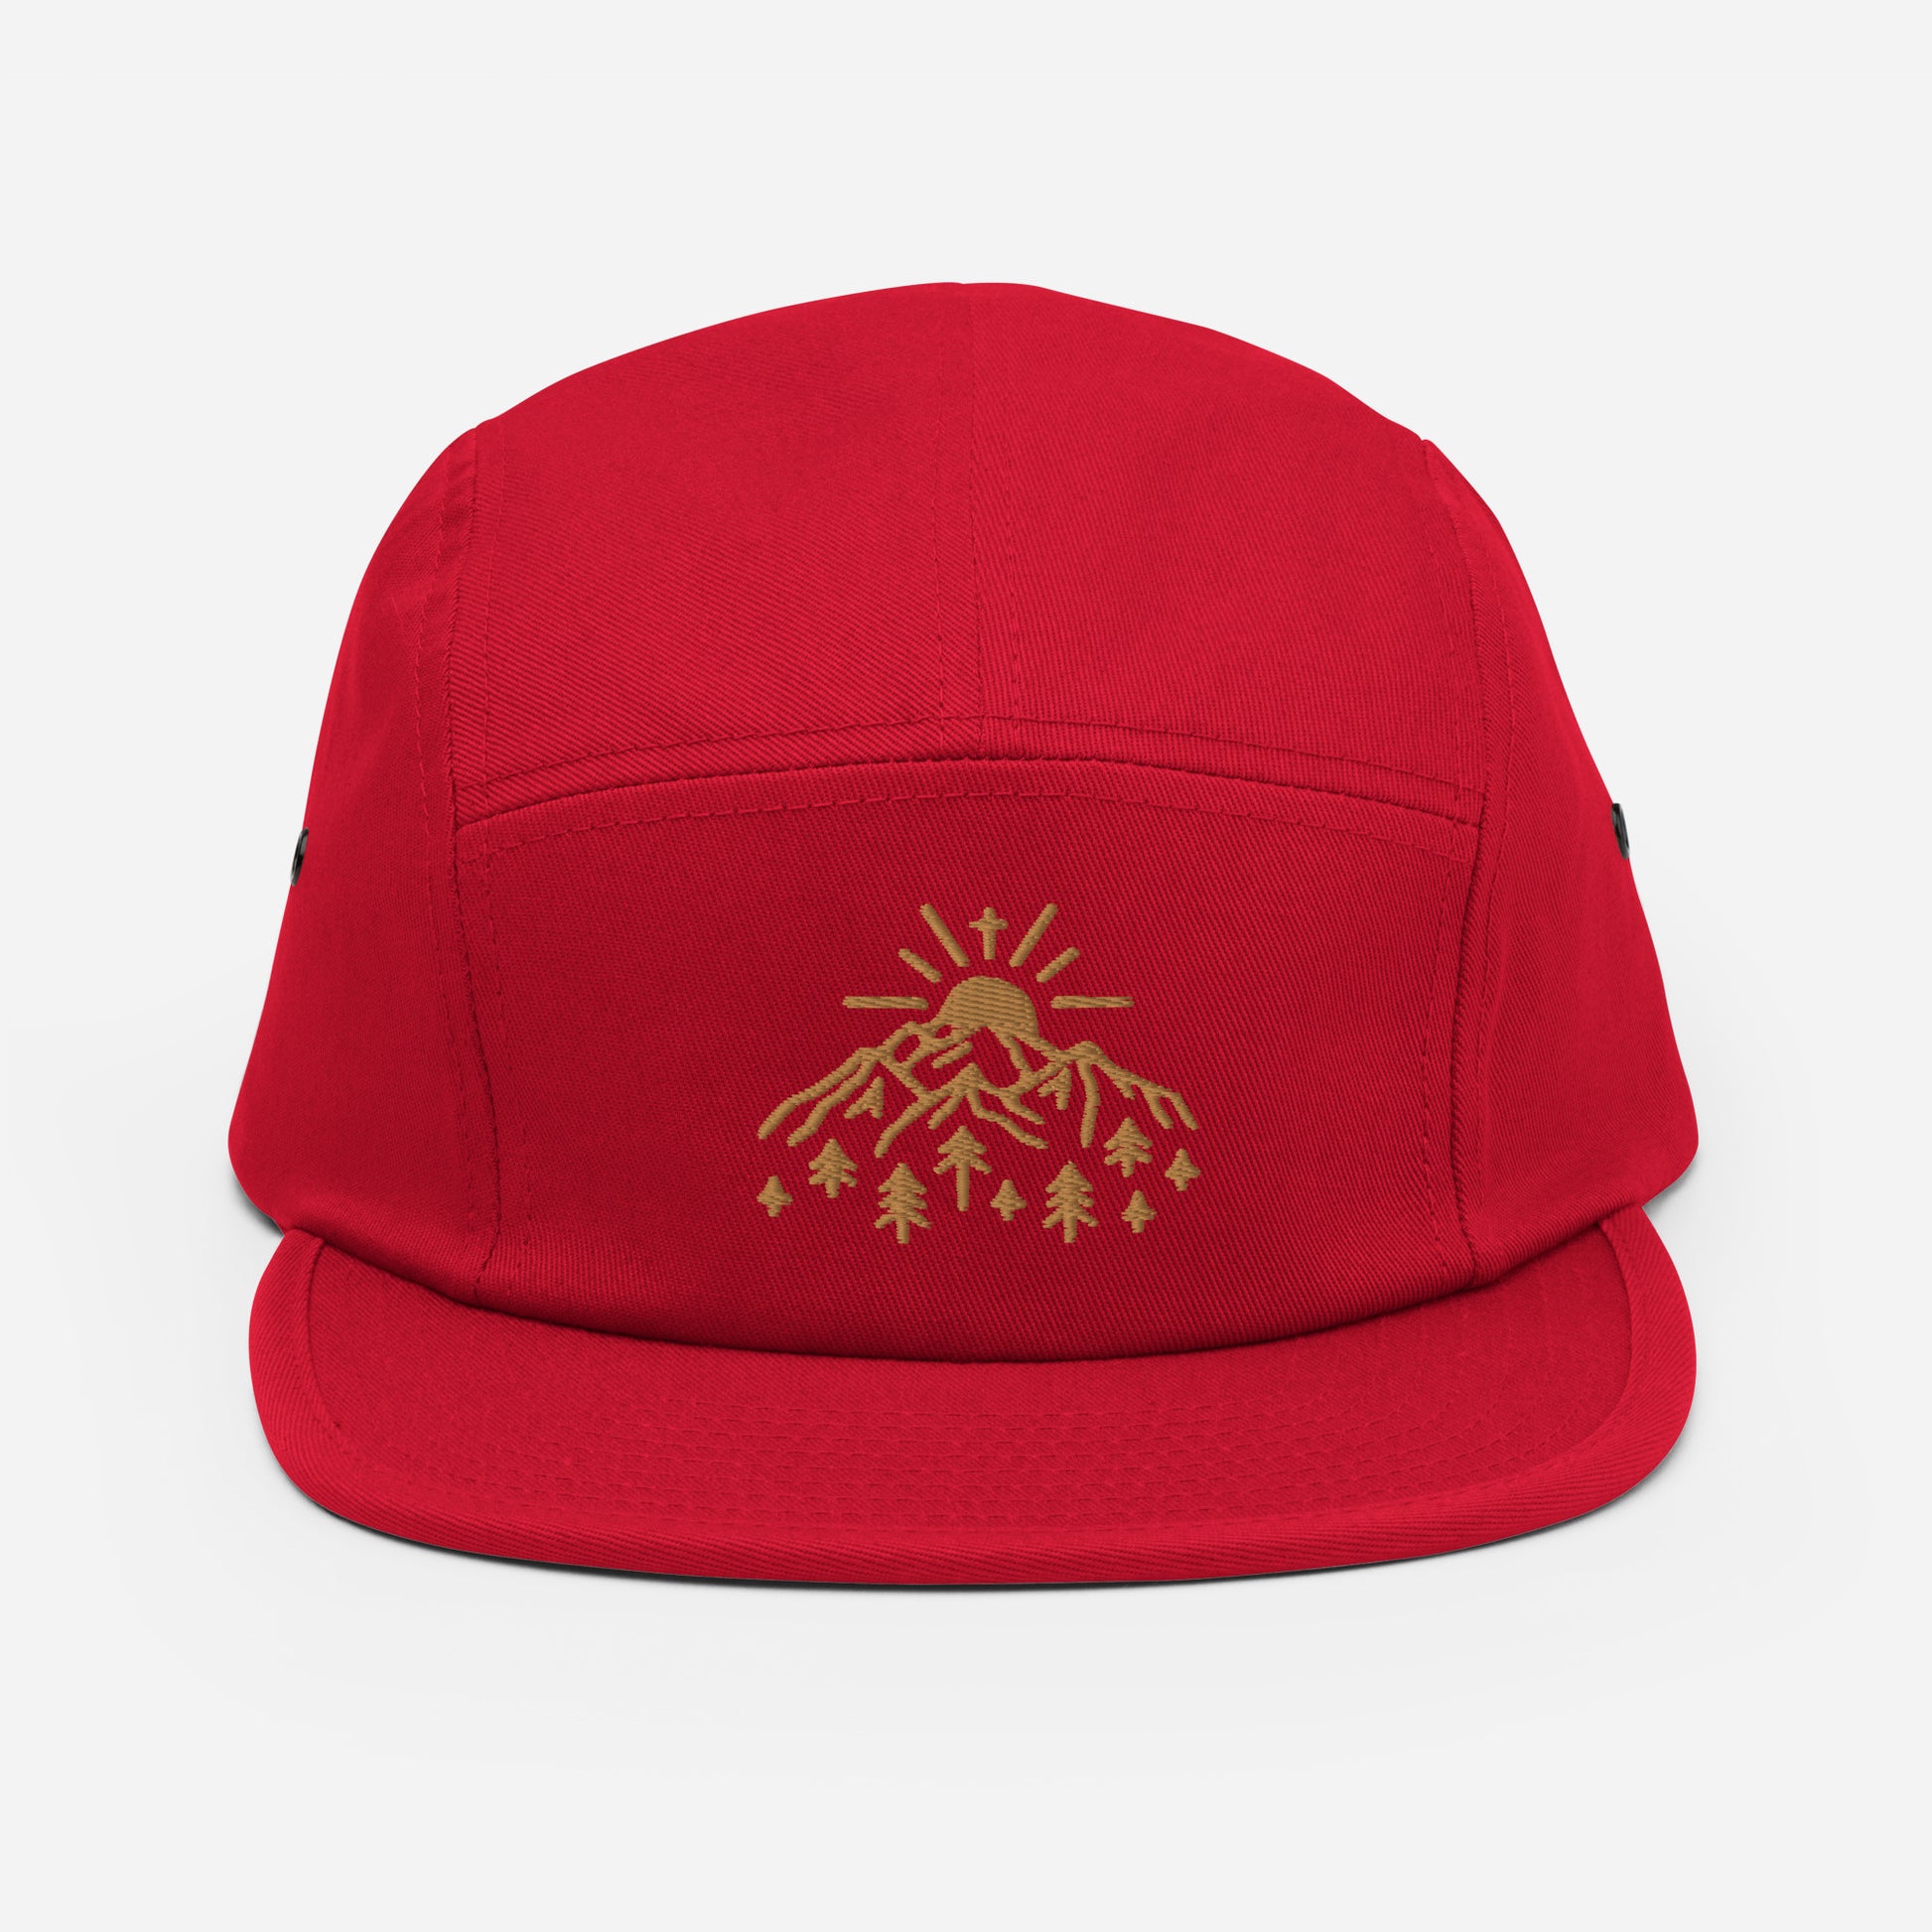 Embroidered Five Panel Hat - TWCC - A Thousand Elsewhere